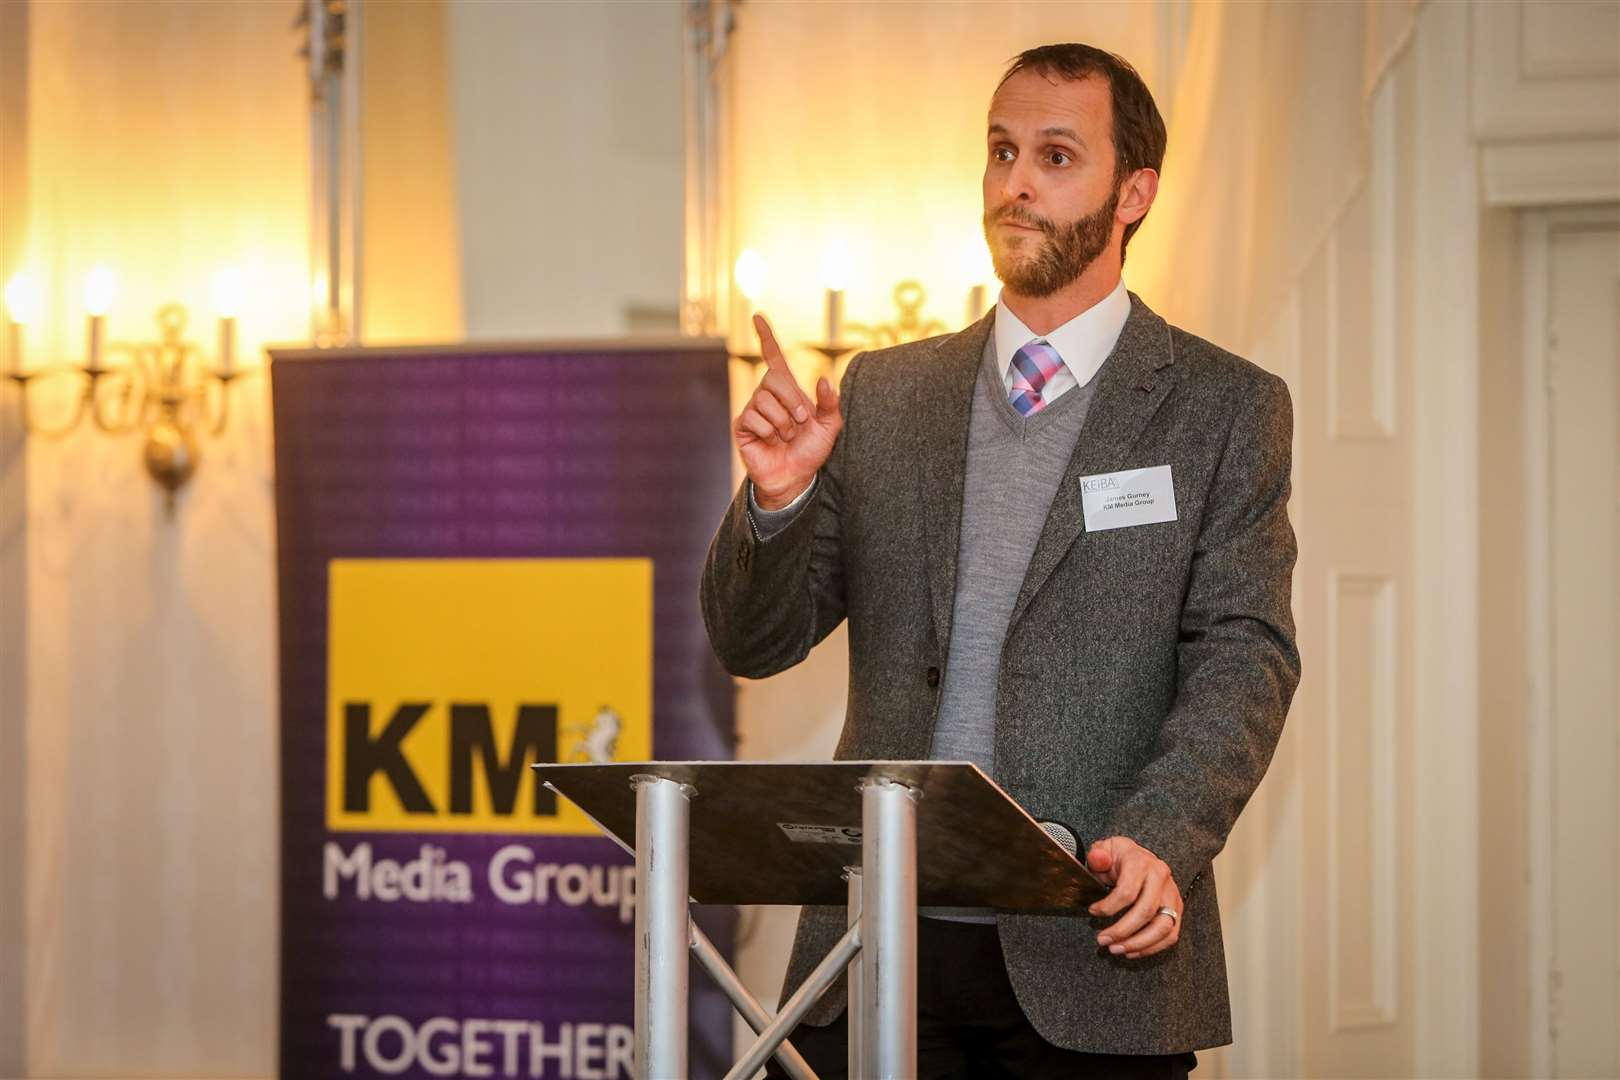 James Gurney, MD of the KM Media Group, at the KEiBA launch event